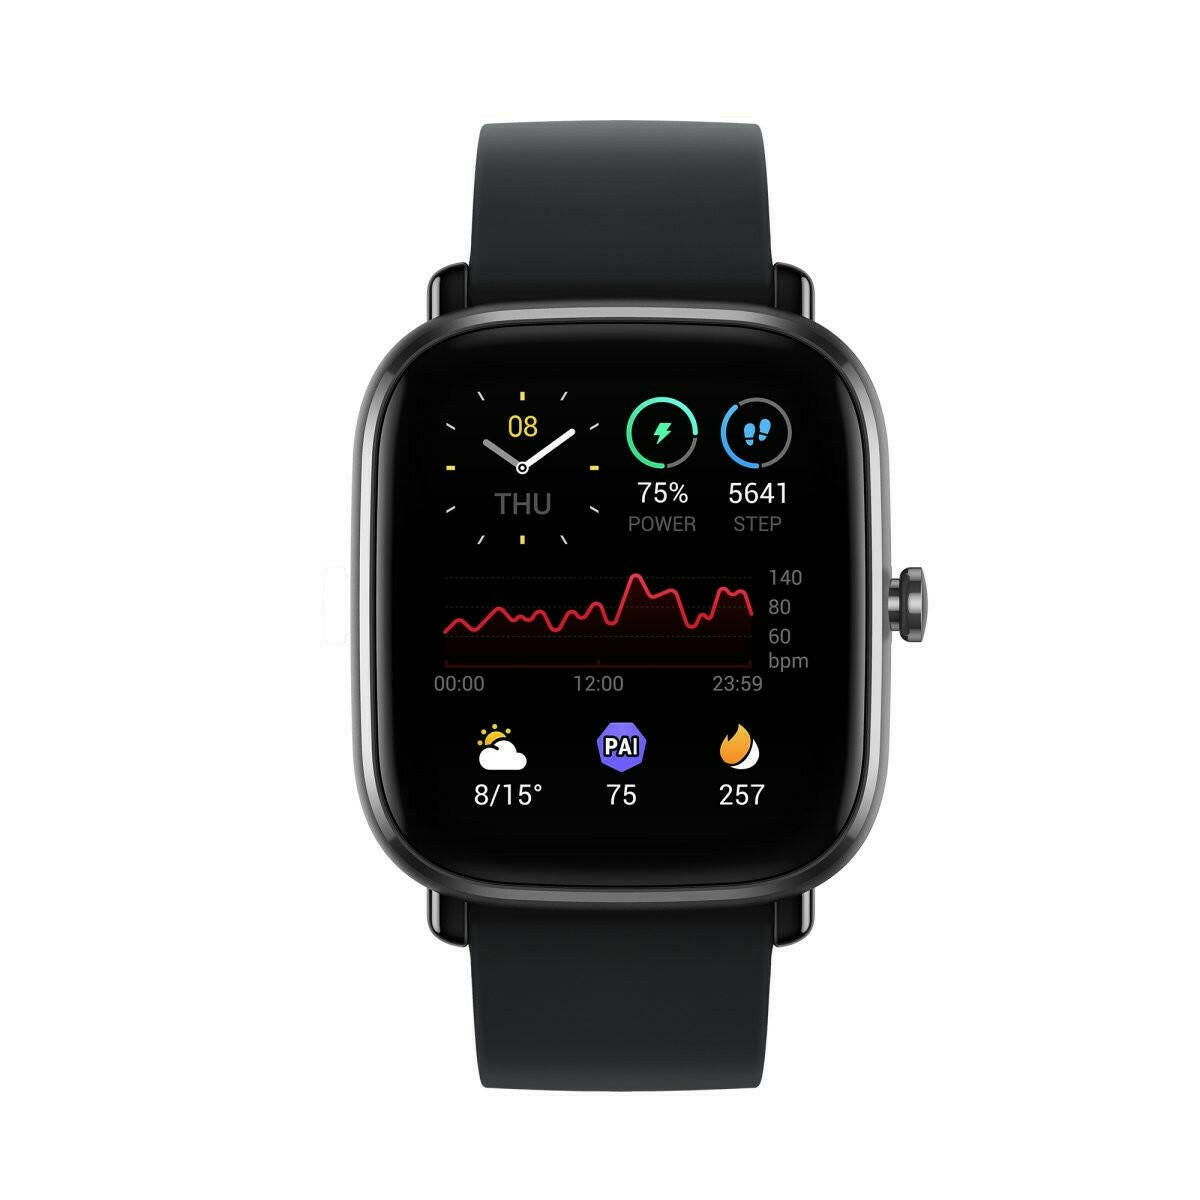 Amazfit GTS 2 Mini New Version Goes for First Sale Today at 12 Noon Via   with Special Discount: Price, Specifications - MySmartPrice